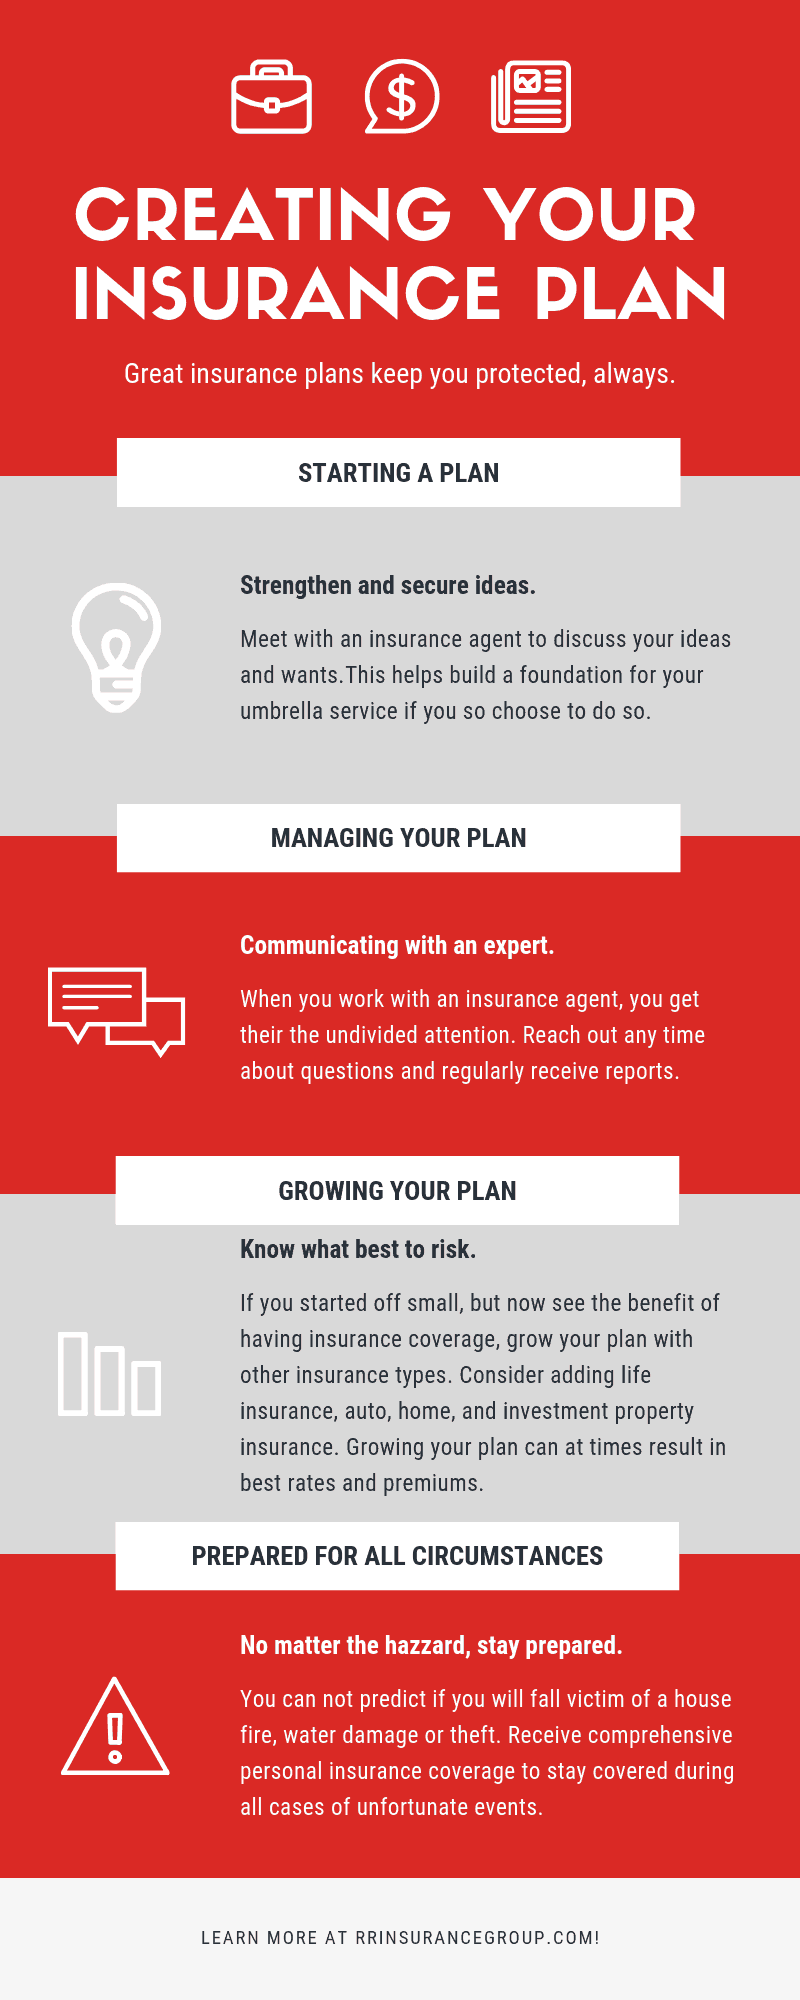 Creating Your Insurance Plan